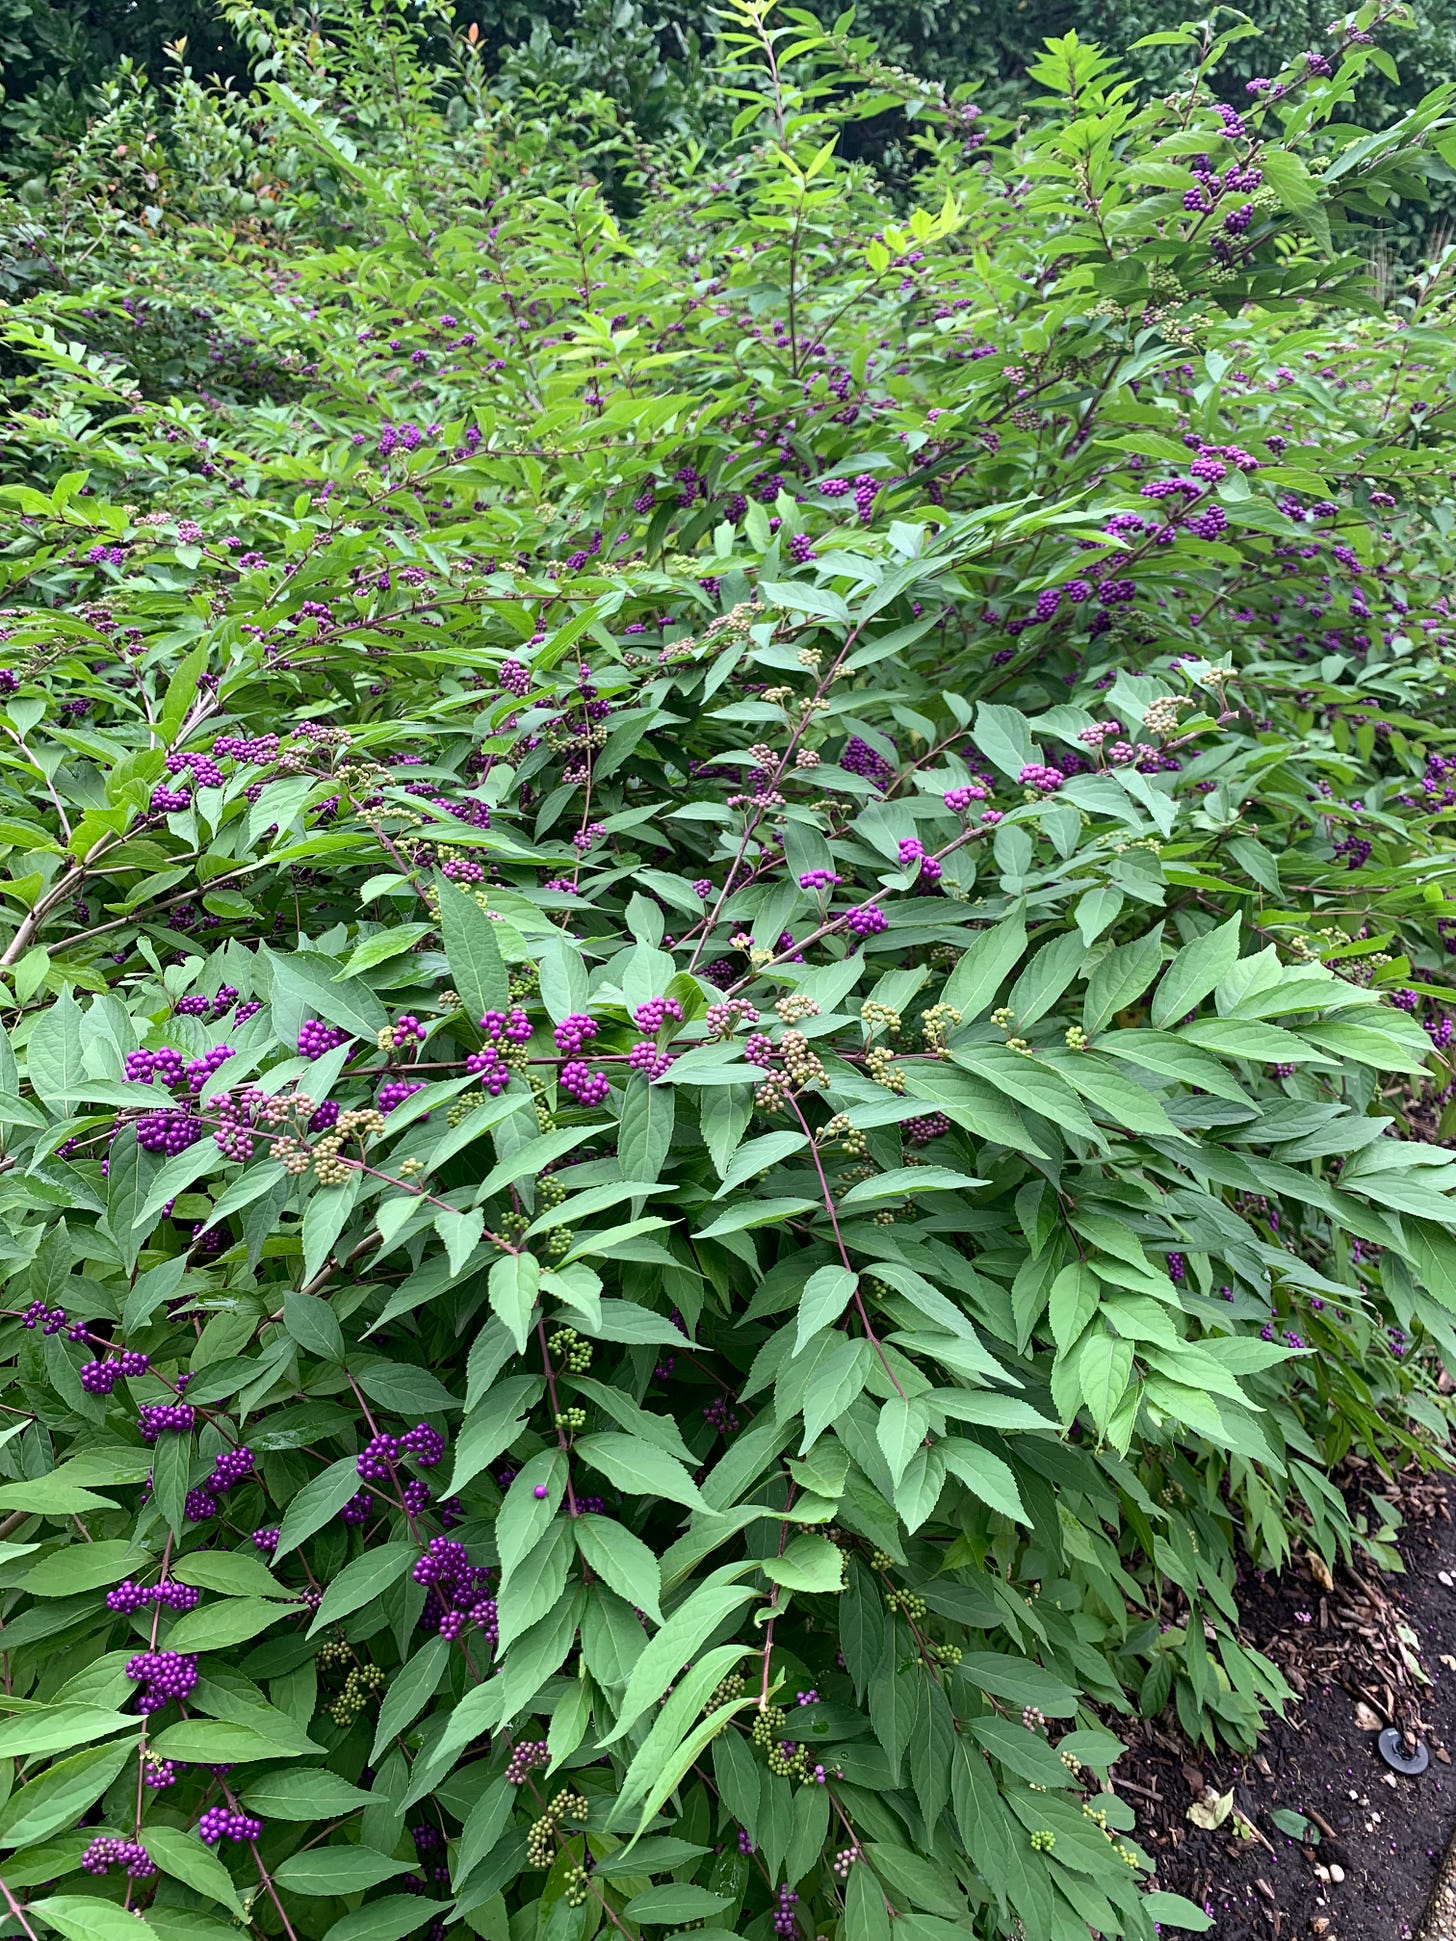 A bushy green plant with clumps of bright purple, lilac, cream, and green berries on its branches.